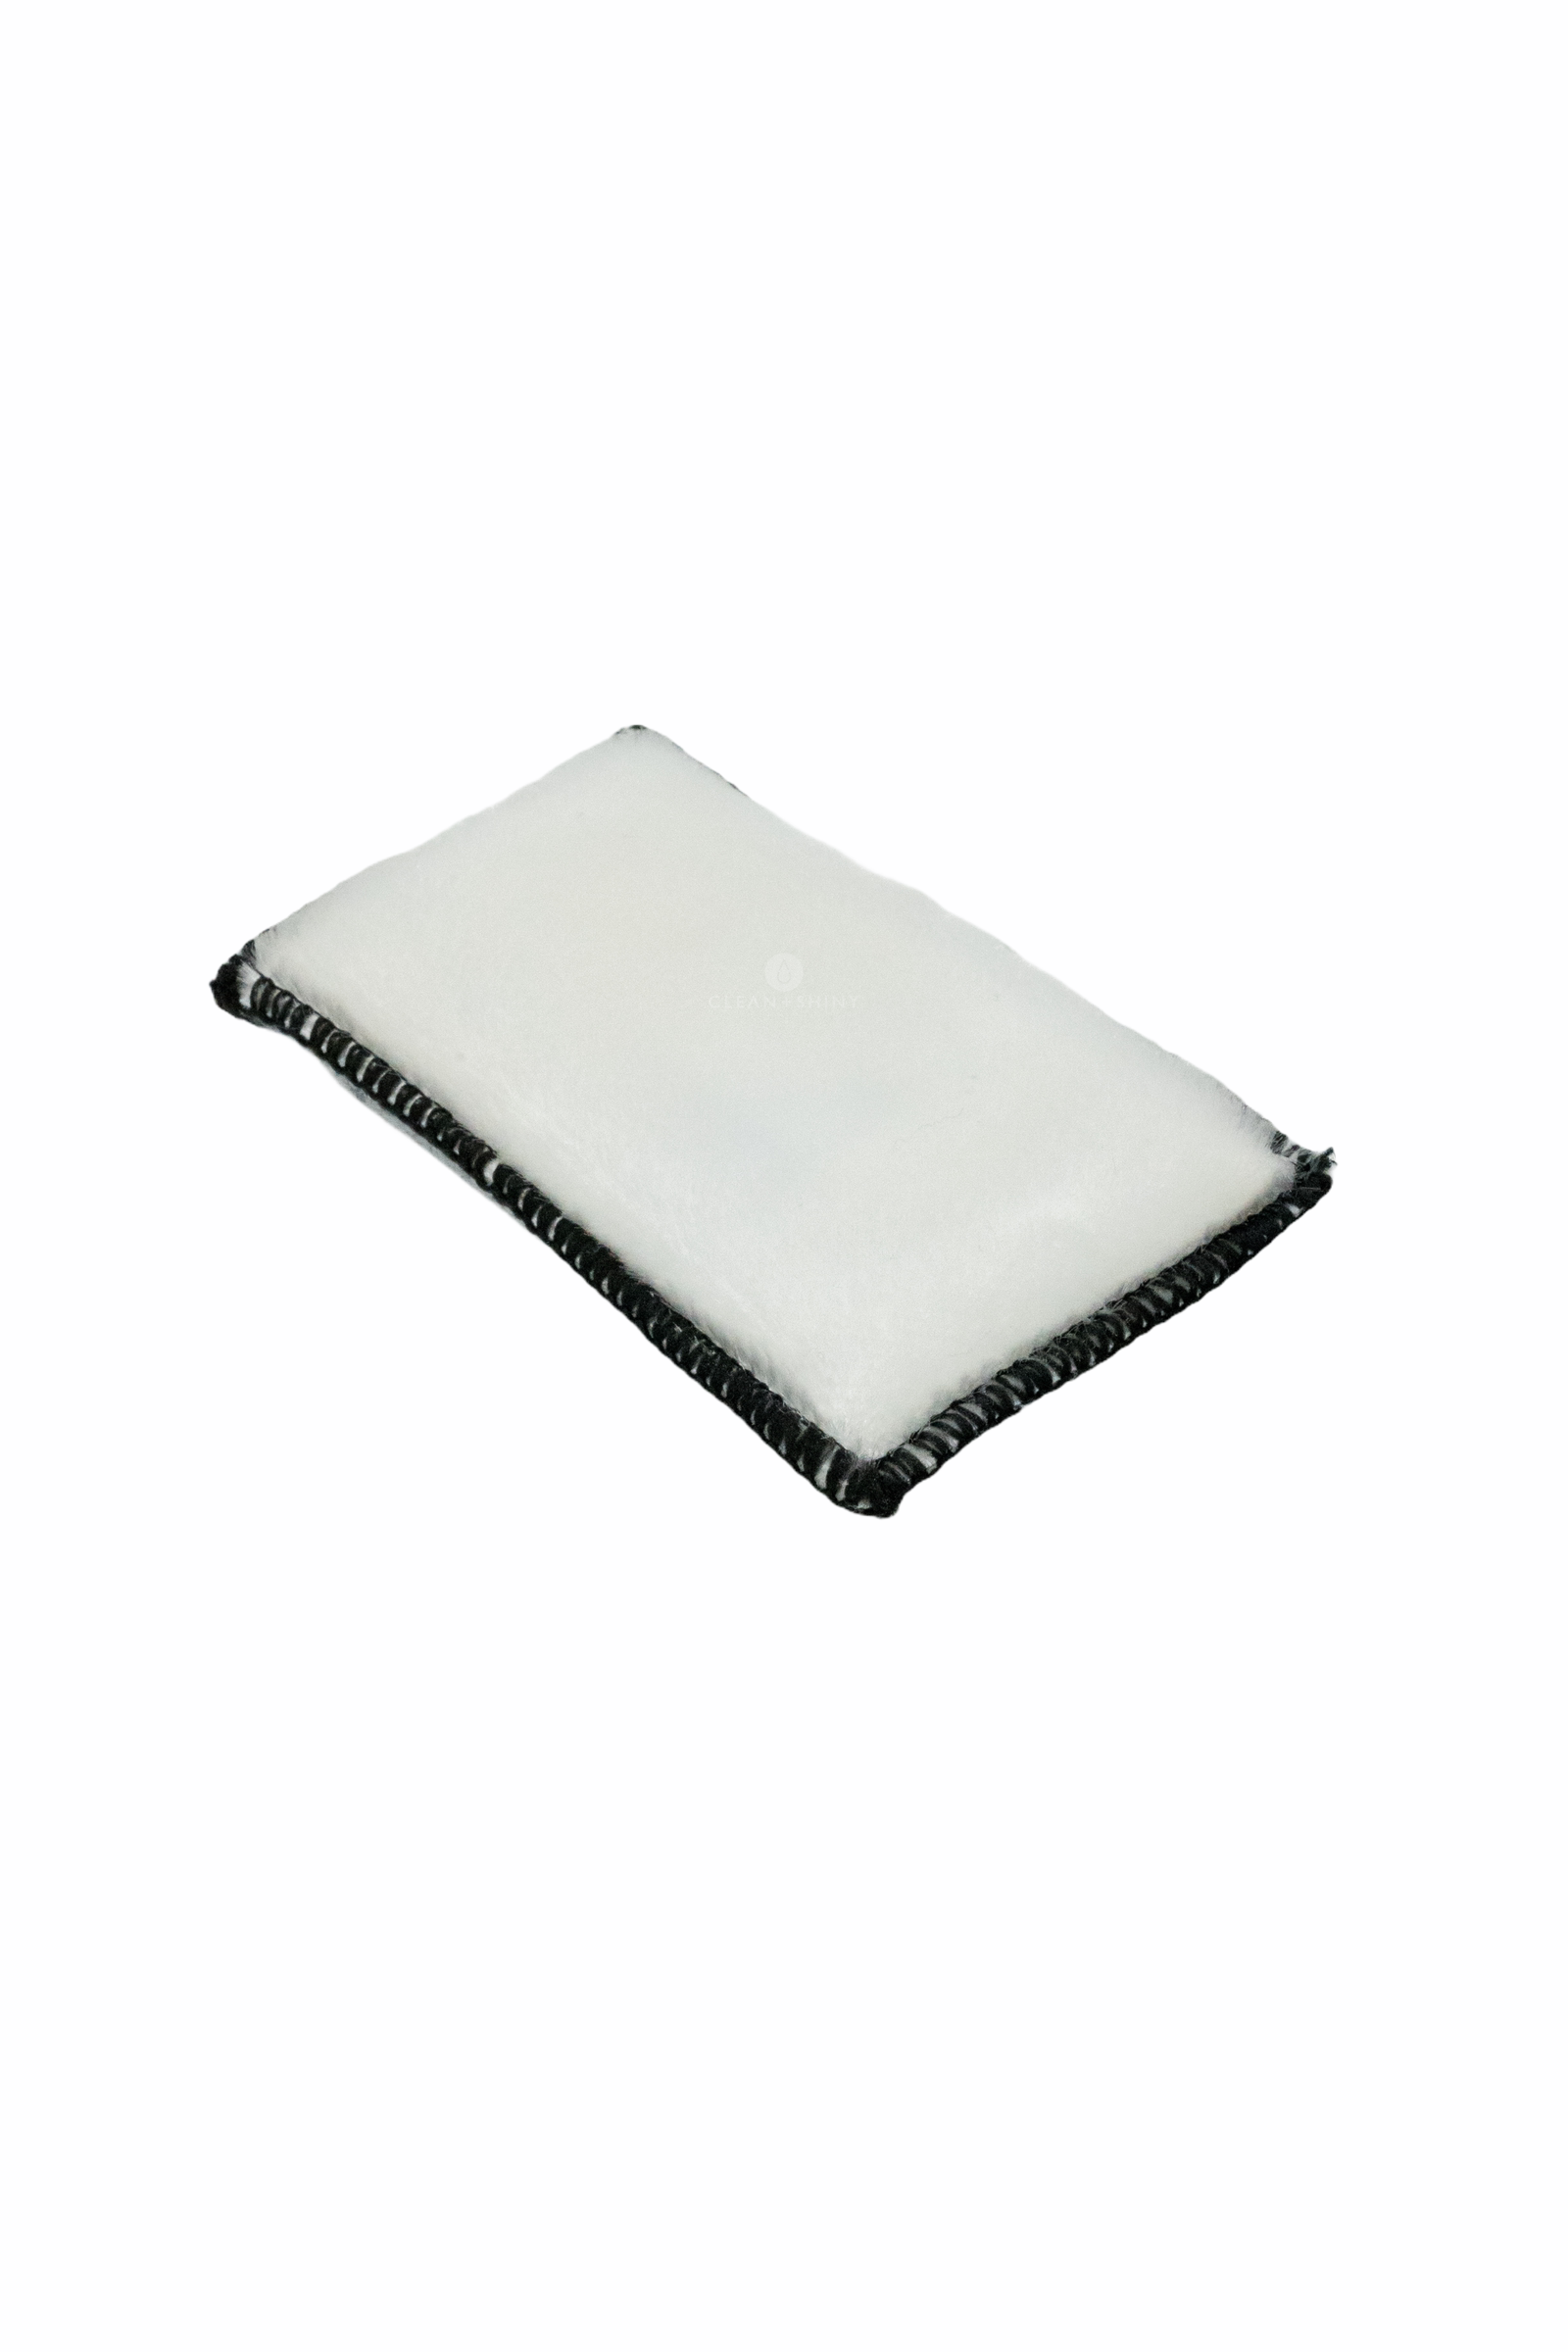 Clean and Shiny Scrub It 3000 Interior 2 in 1 Pad - 135 x 90mm